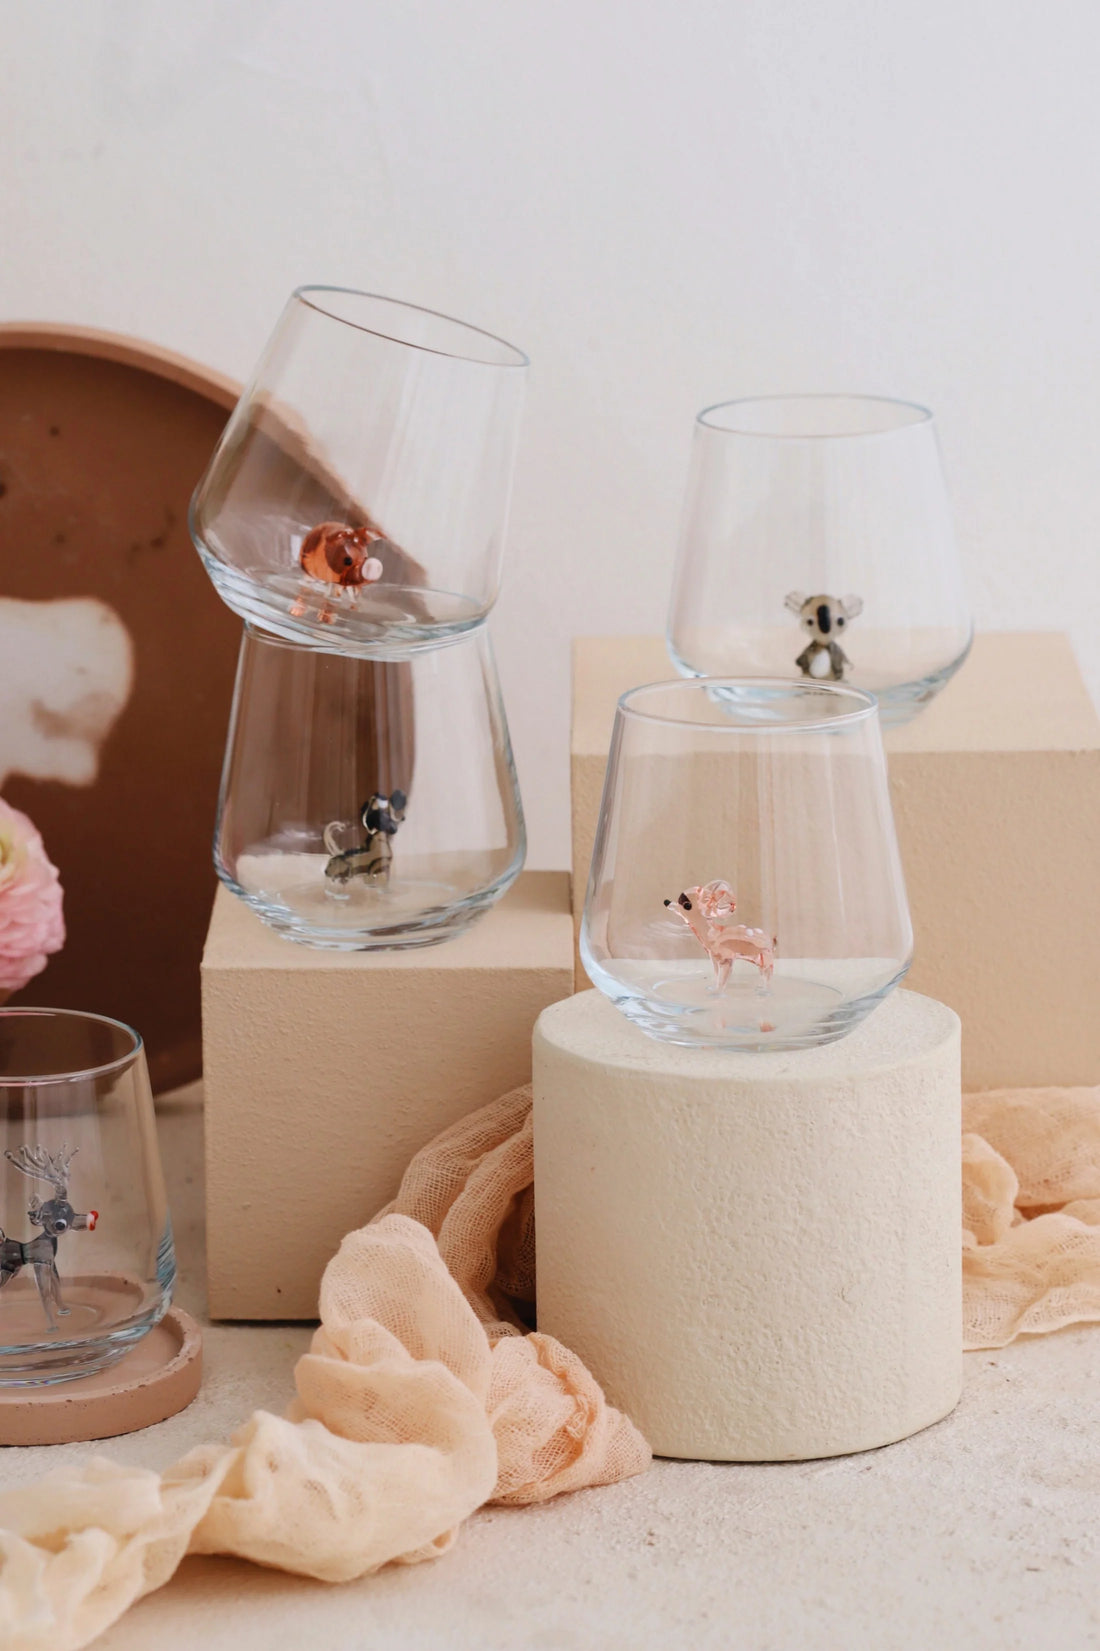 Elevate Your Drinking Experience with MiniZoo USA's Handmade Figurine Glasses